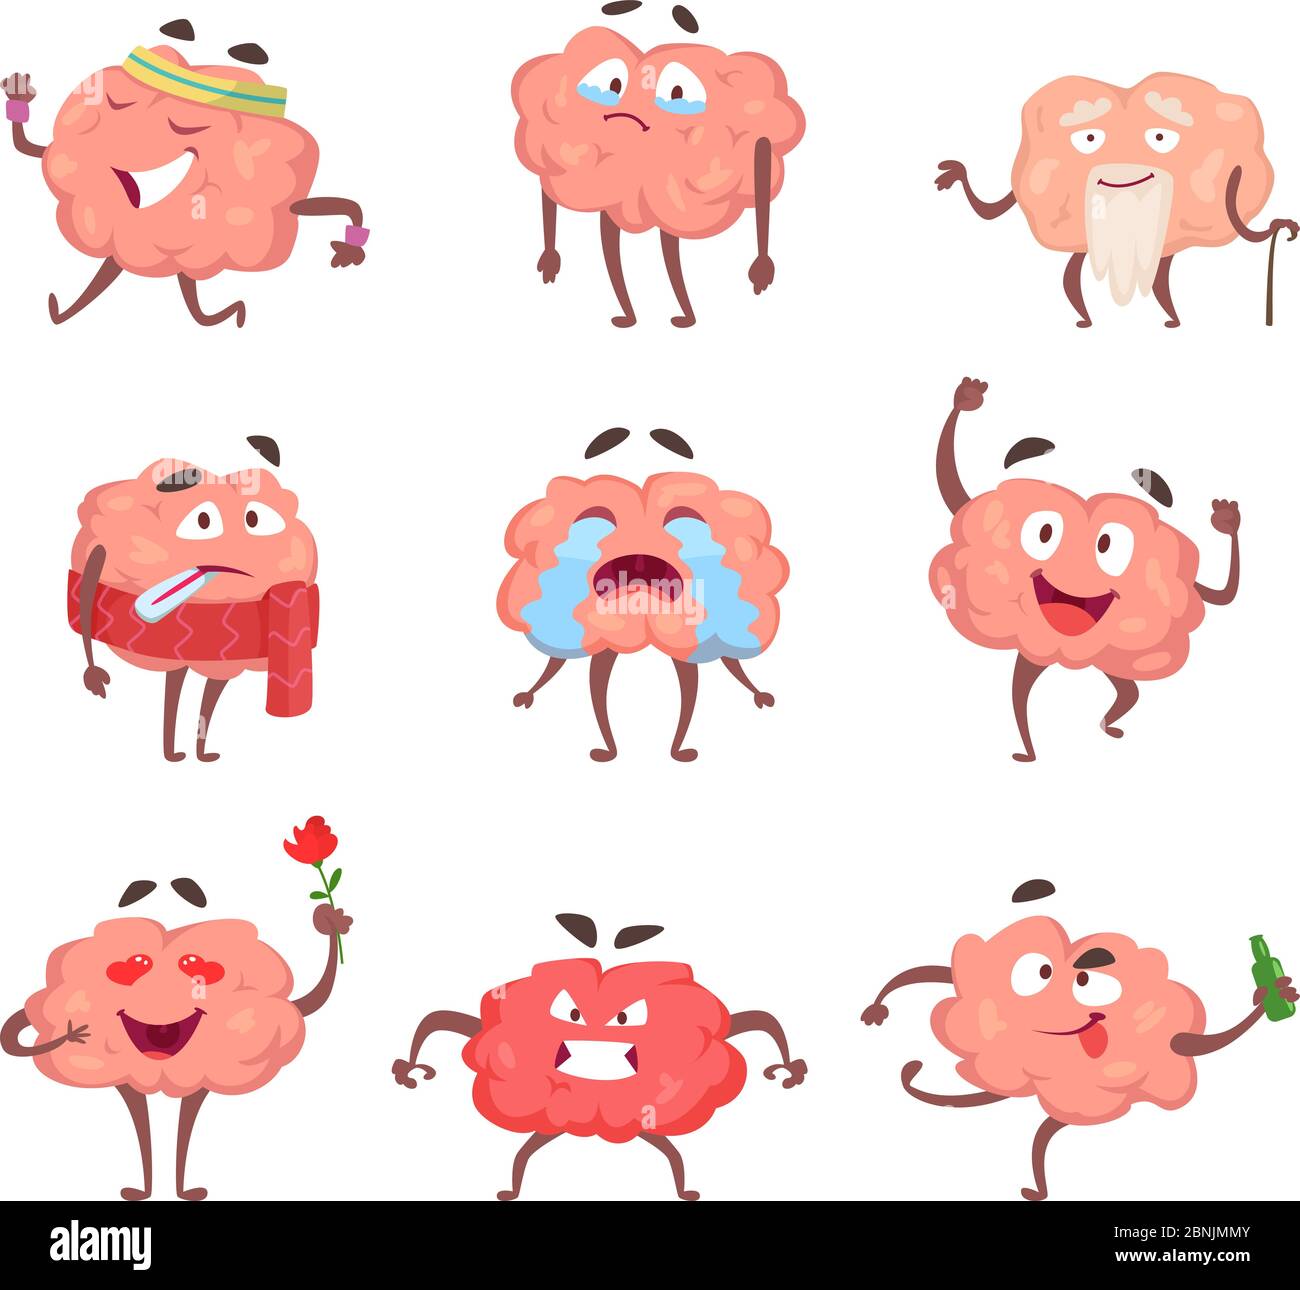 Funny cartoon characters. Brain in action poses Stock Vector